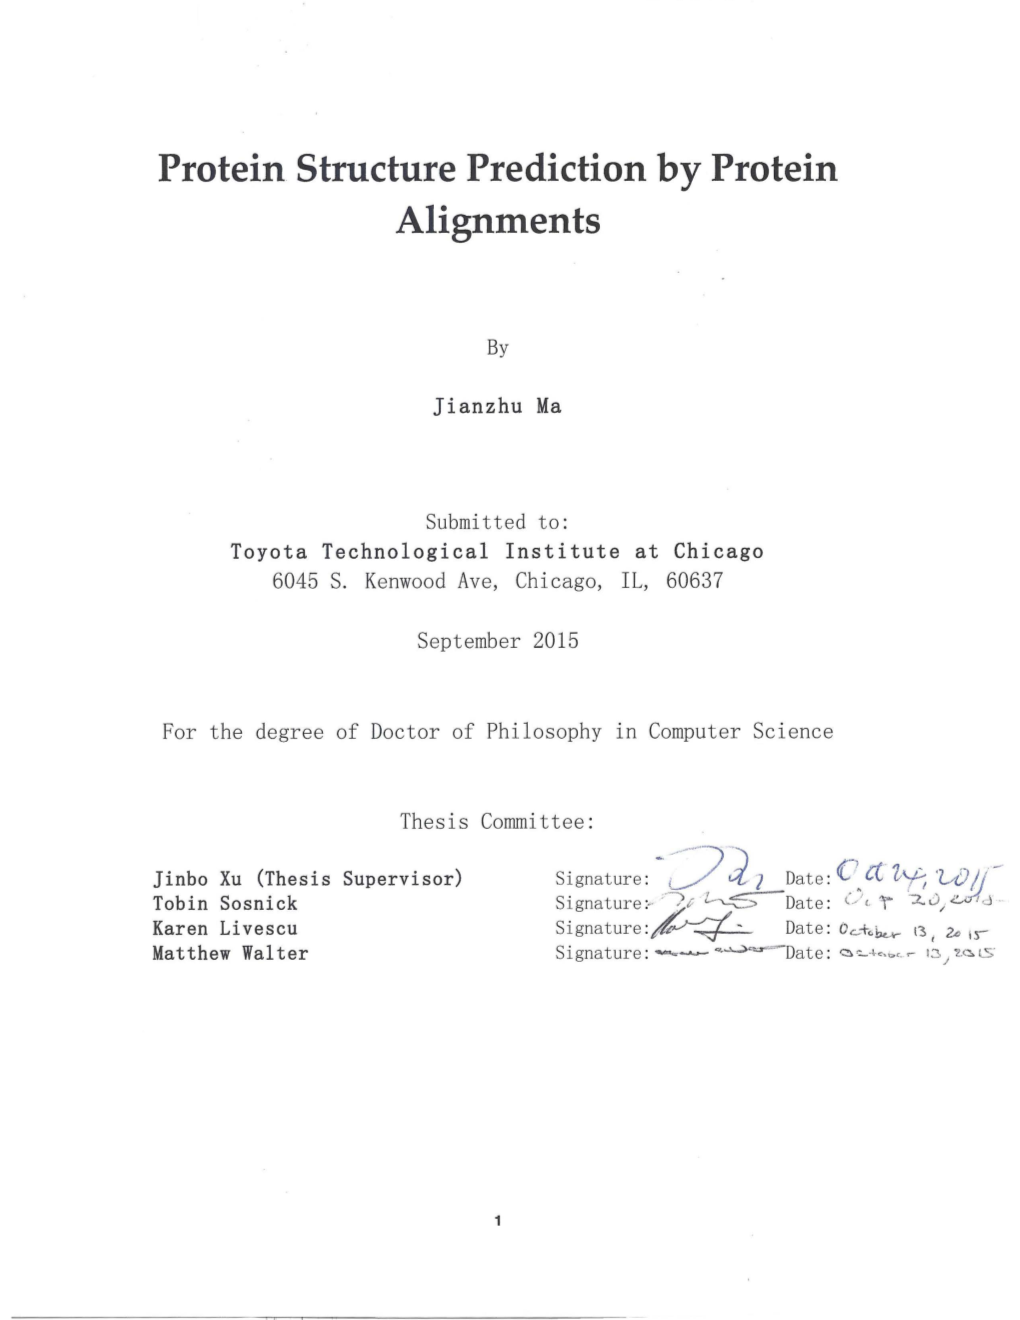 Protein Structure Prediction by Protein Alignments